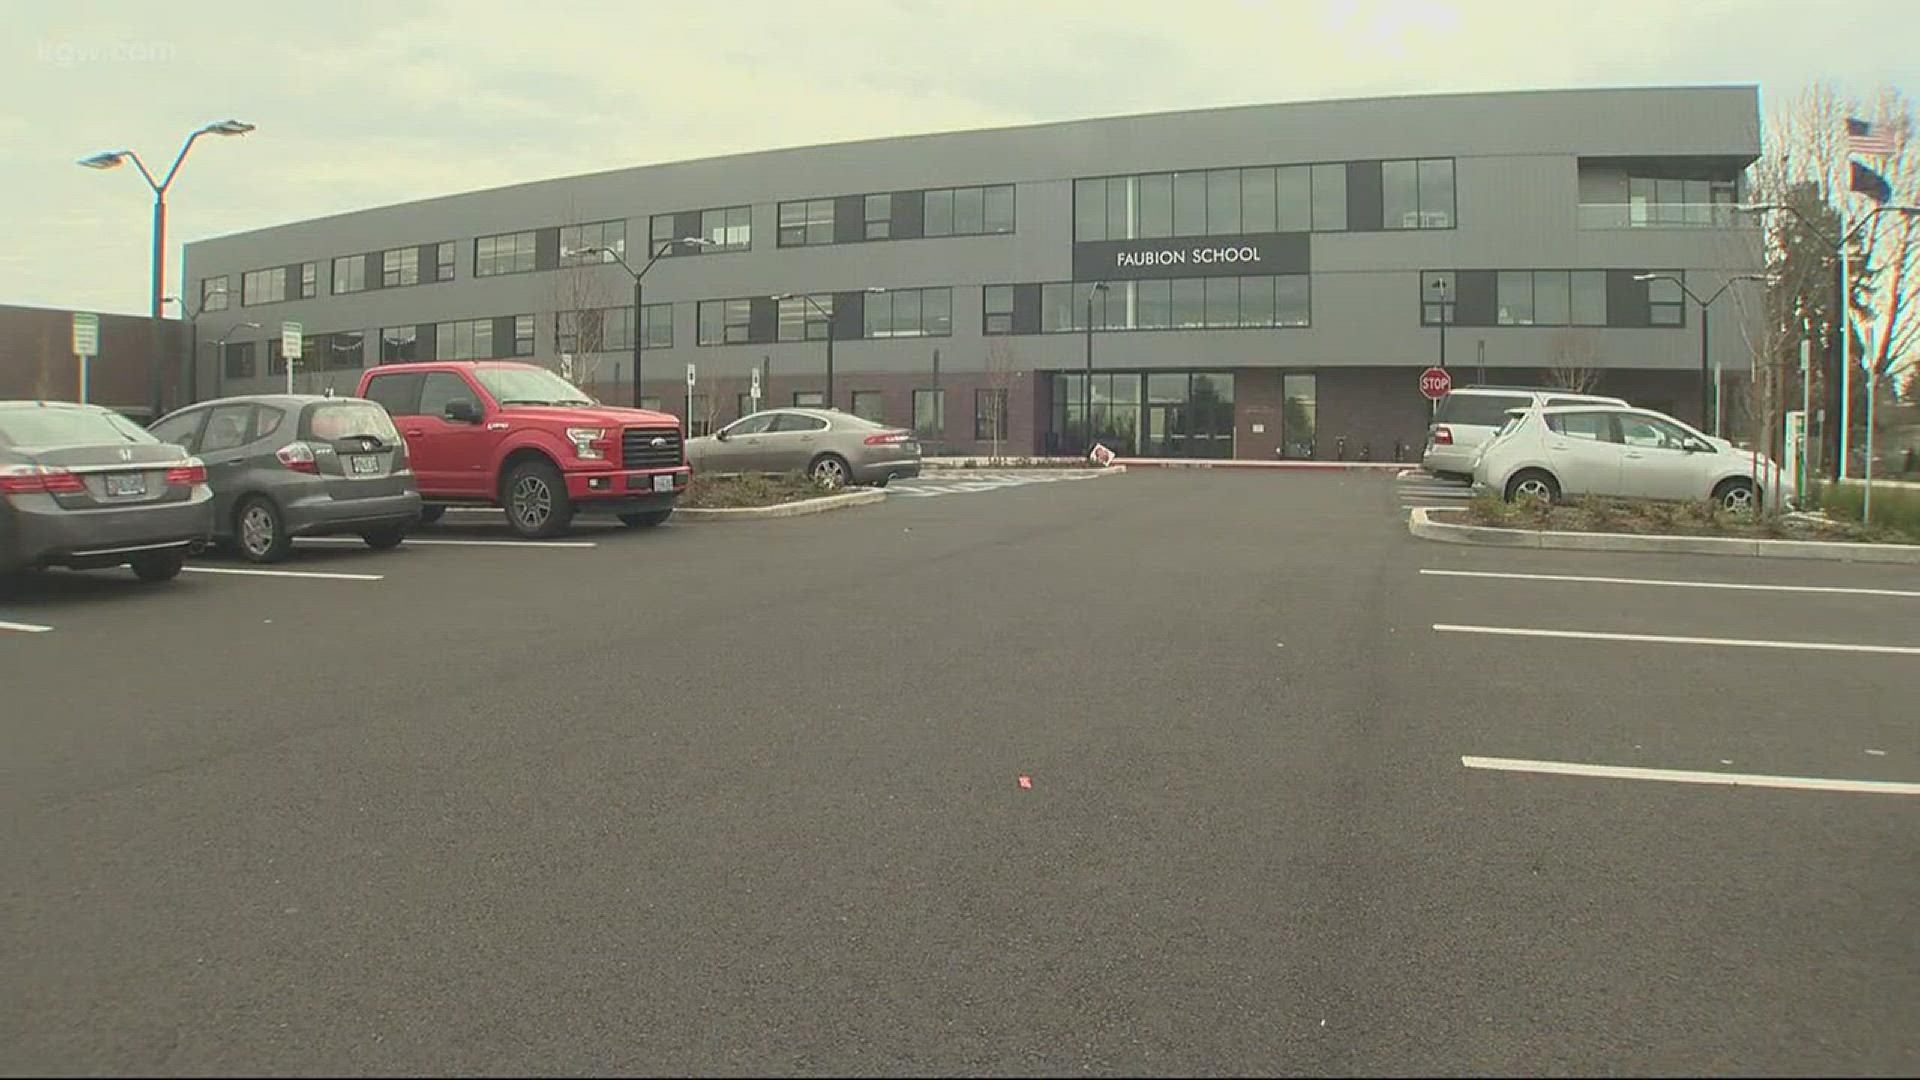 A new model for education now exists in a Northeast Portland neighborhood.